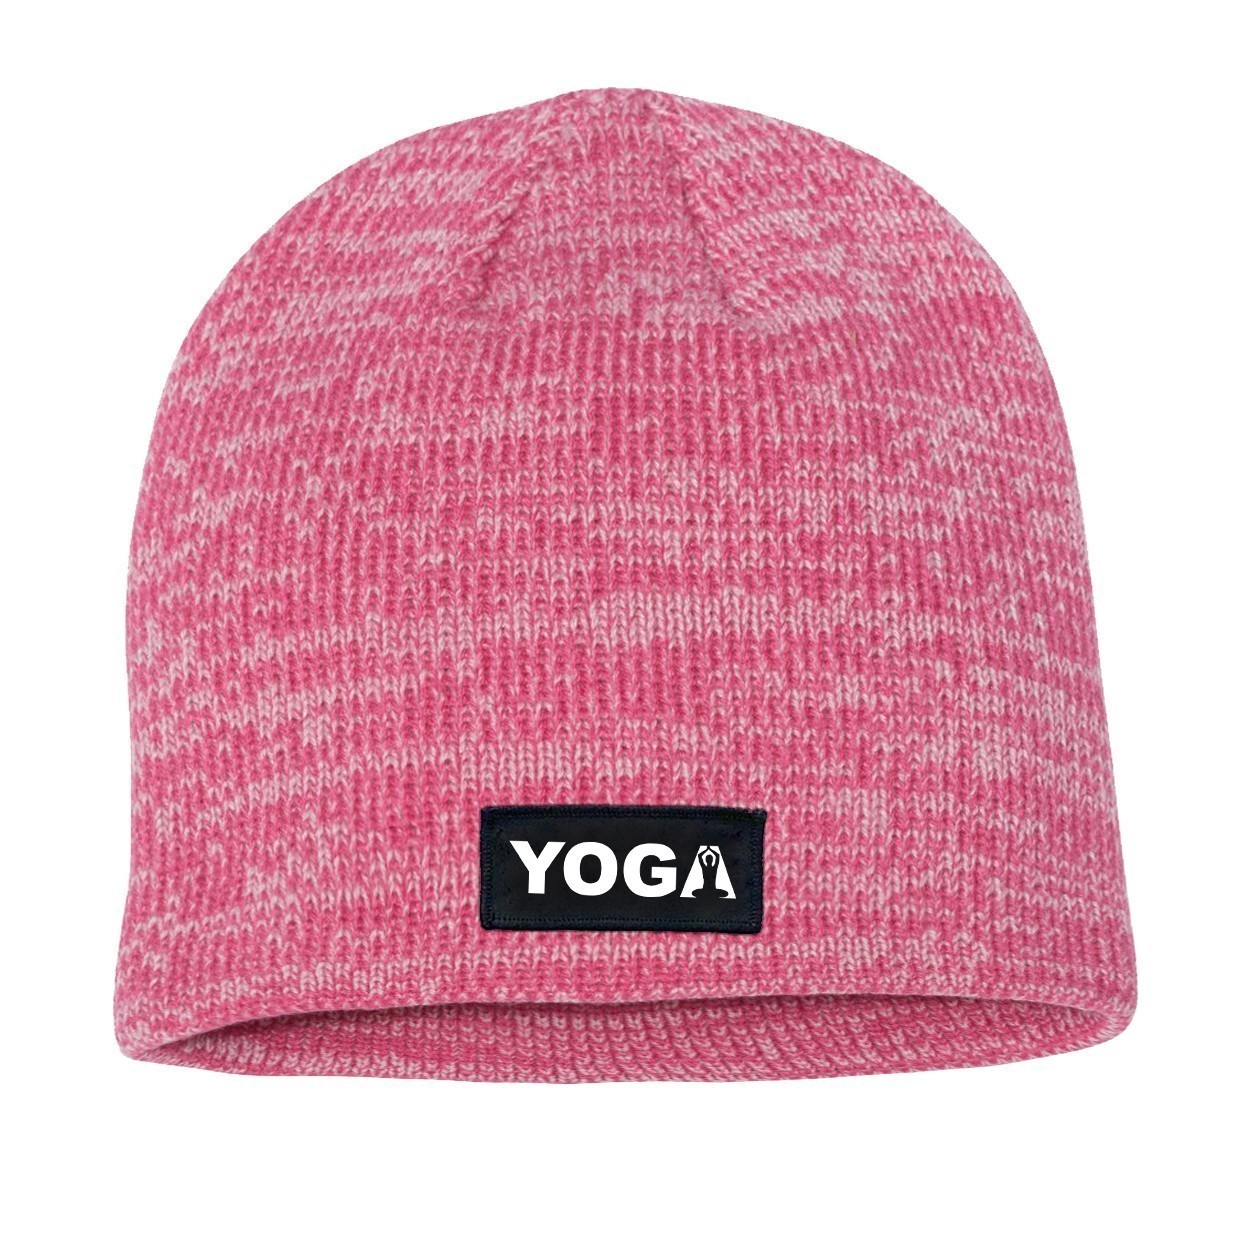 Yoga Meditation Logo Night Out Woven Patch Skully Marled Knit Beanie Pink/Dark Pink (White Logo)